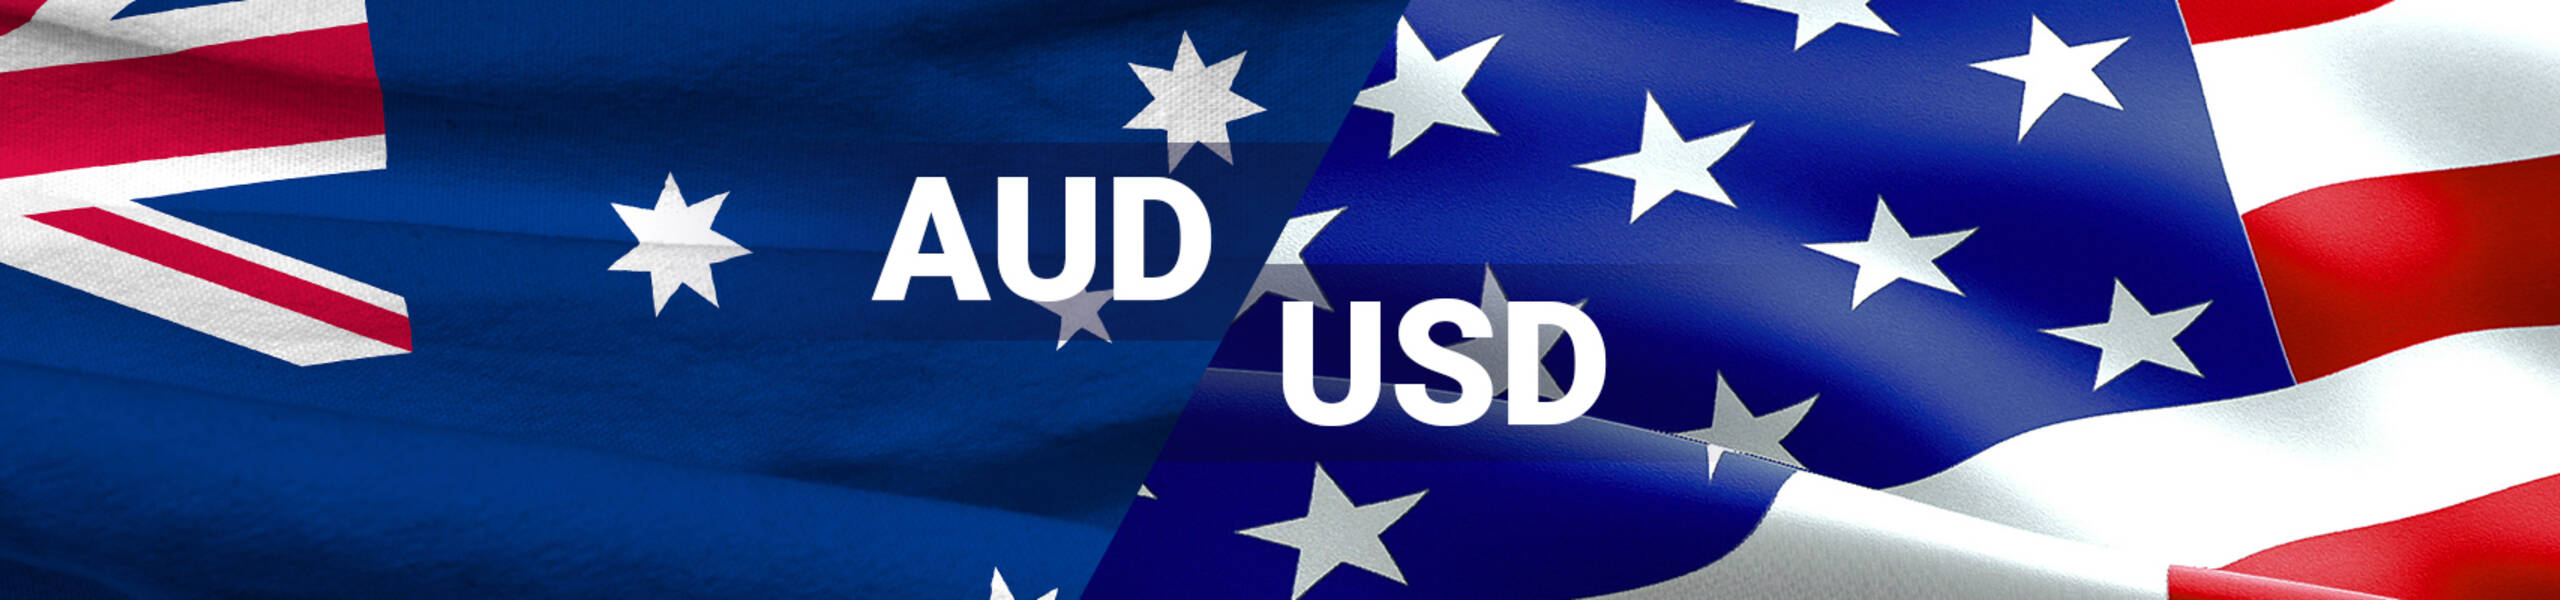 AUD/USD: bears ready to continue sales